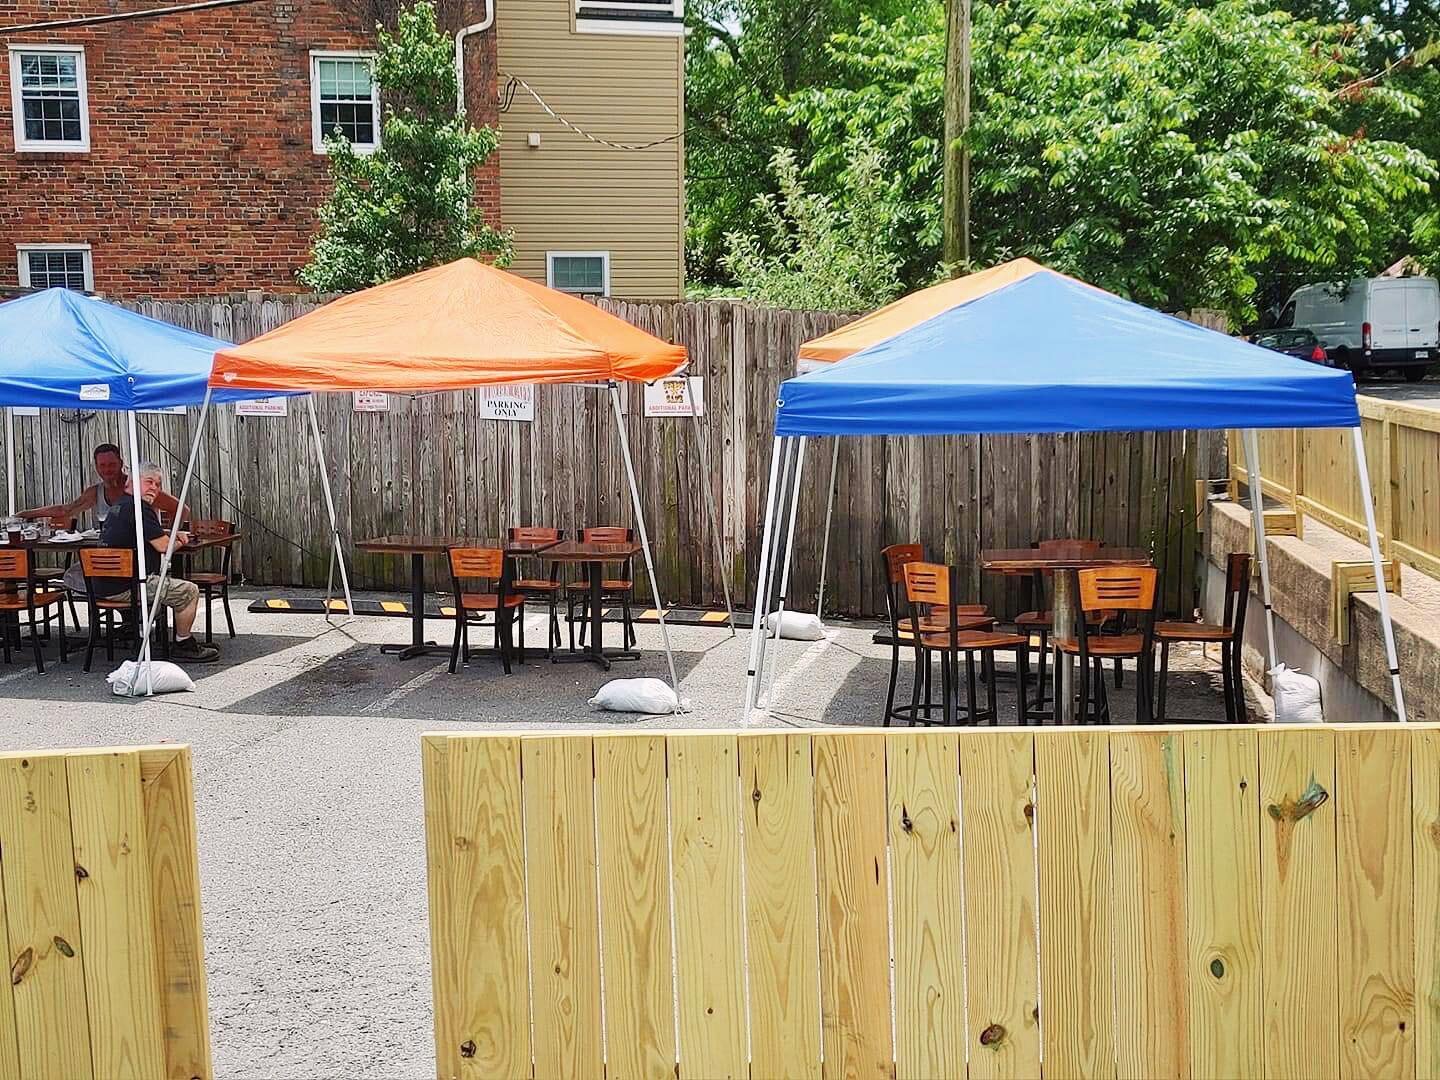 Stop by Cowboy Cafe and enjoy our shaded patio space! 🍻

&bull;
#vabusiness #localfood #patio